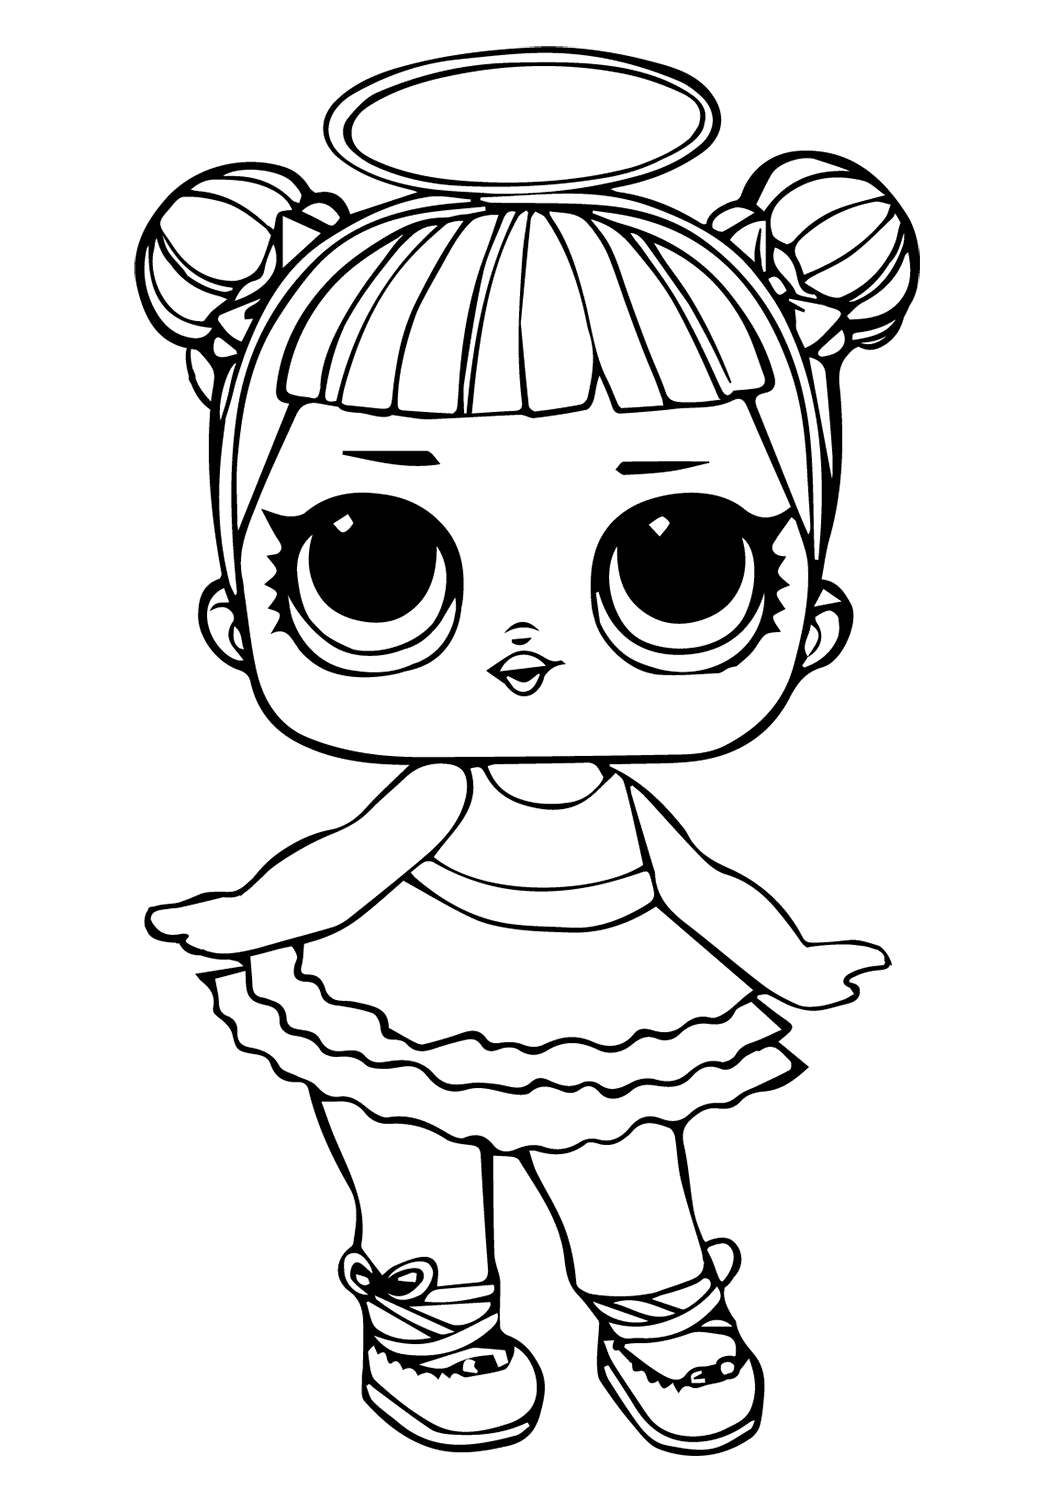 LOL Surprise Coloring Pages   Free Printable Coloring Pages for Kids